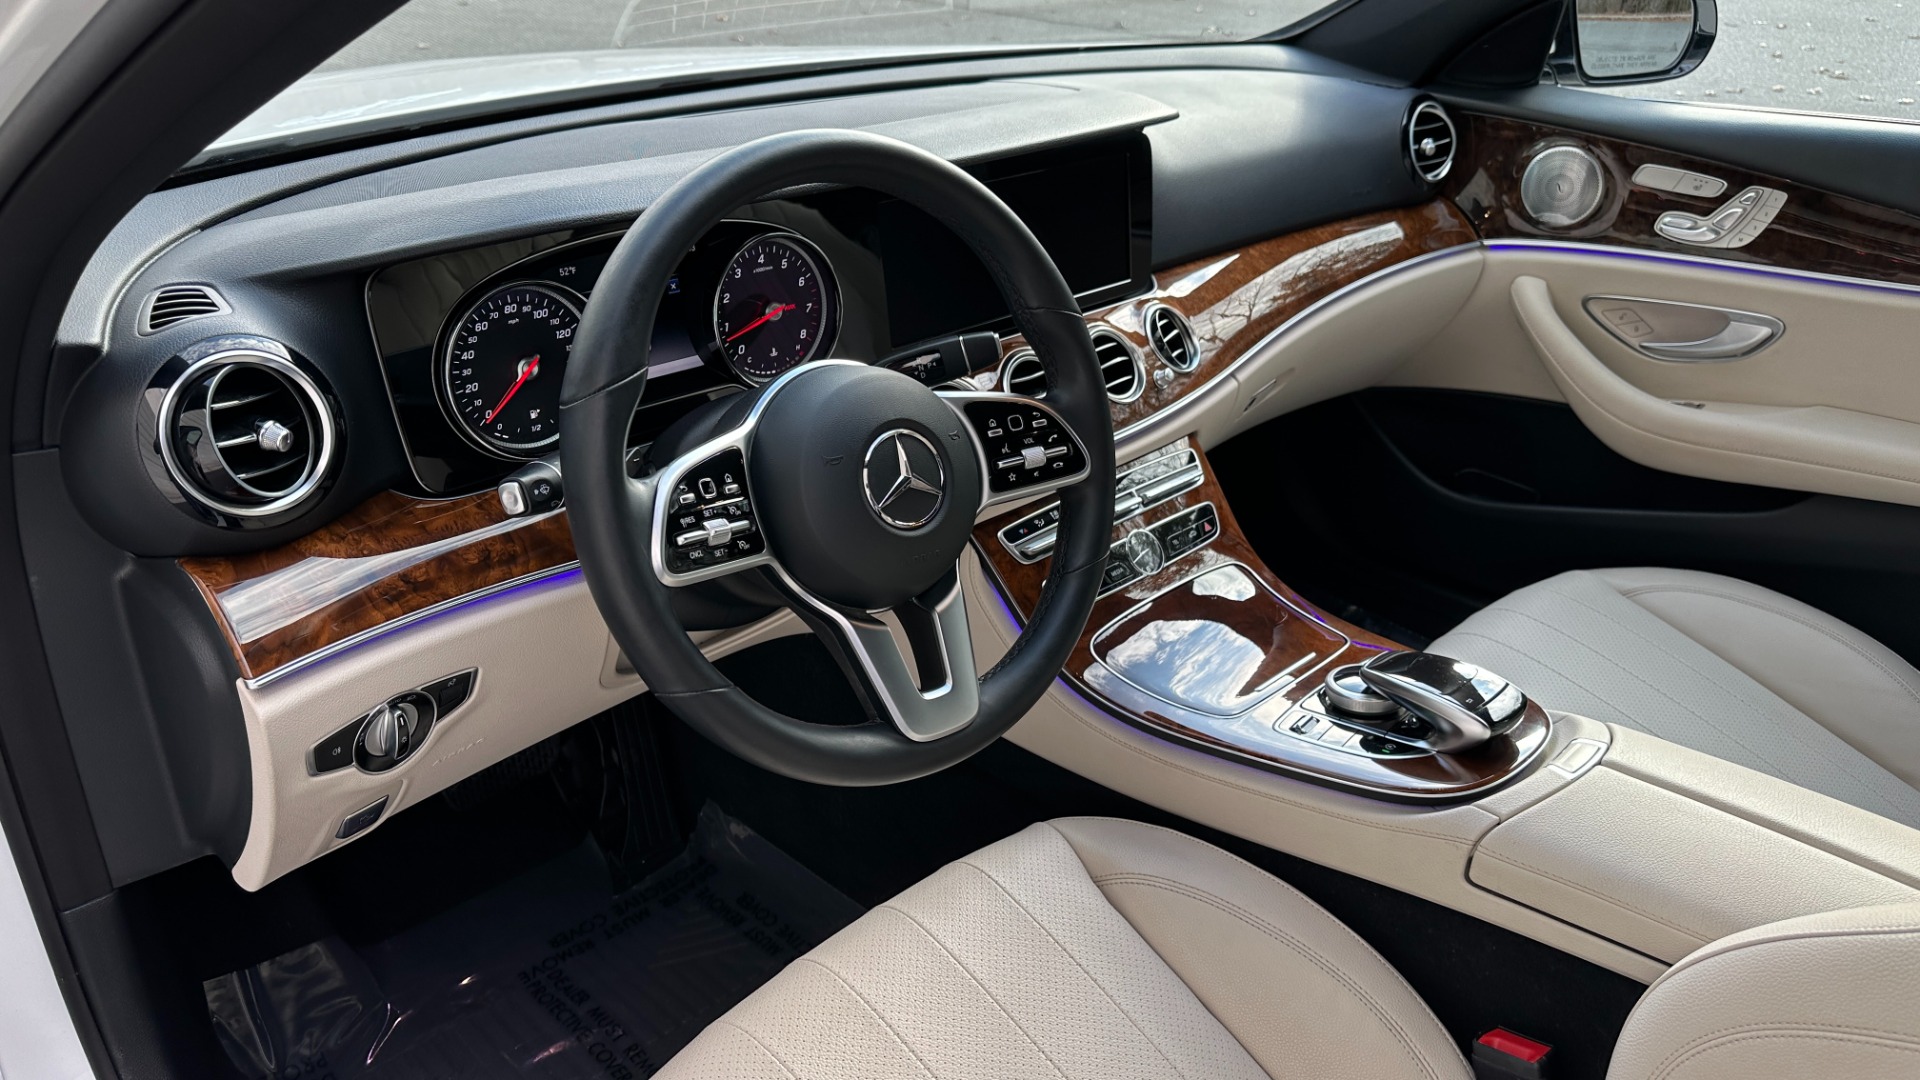 Used 2019 Mercedes-Benz E-Class E300 / PREMIUM PACKAGE / BLIND SPOT / BURMESTER SOUND / HEATED STEERING for sale $35,400 at Formula Imports in Charlotte NC 28227 10